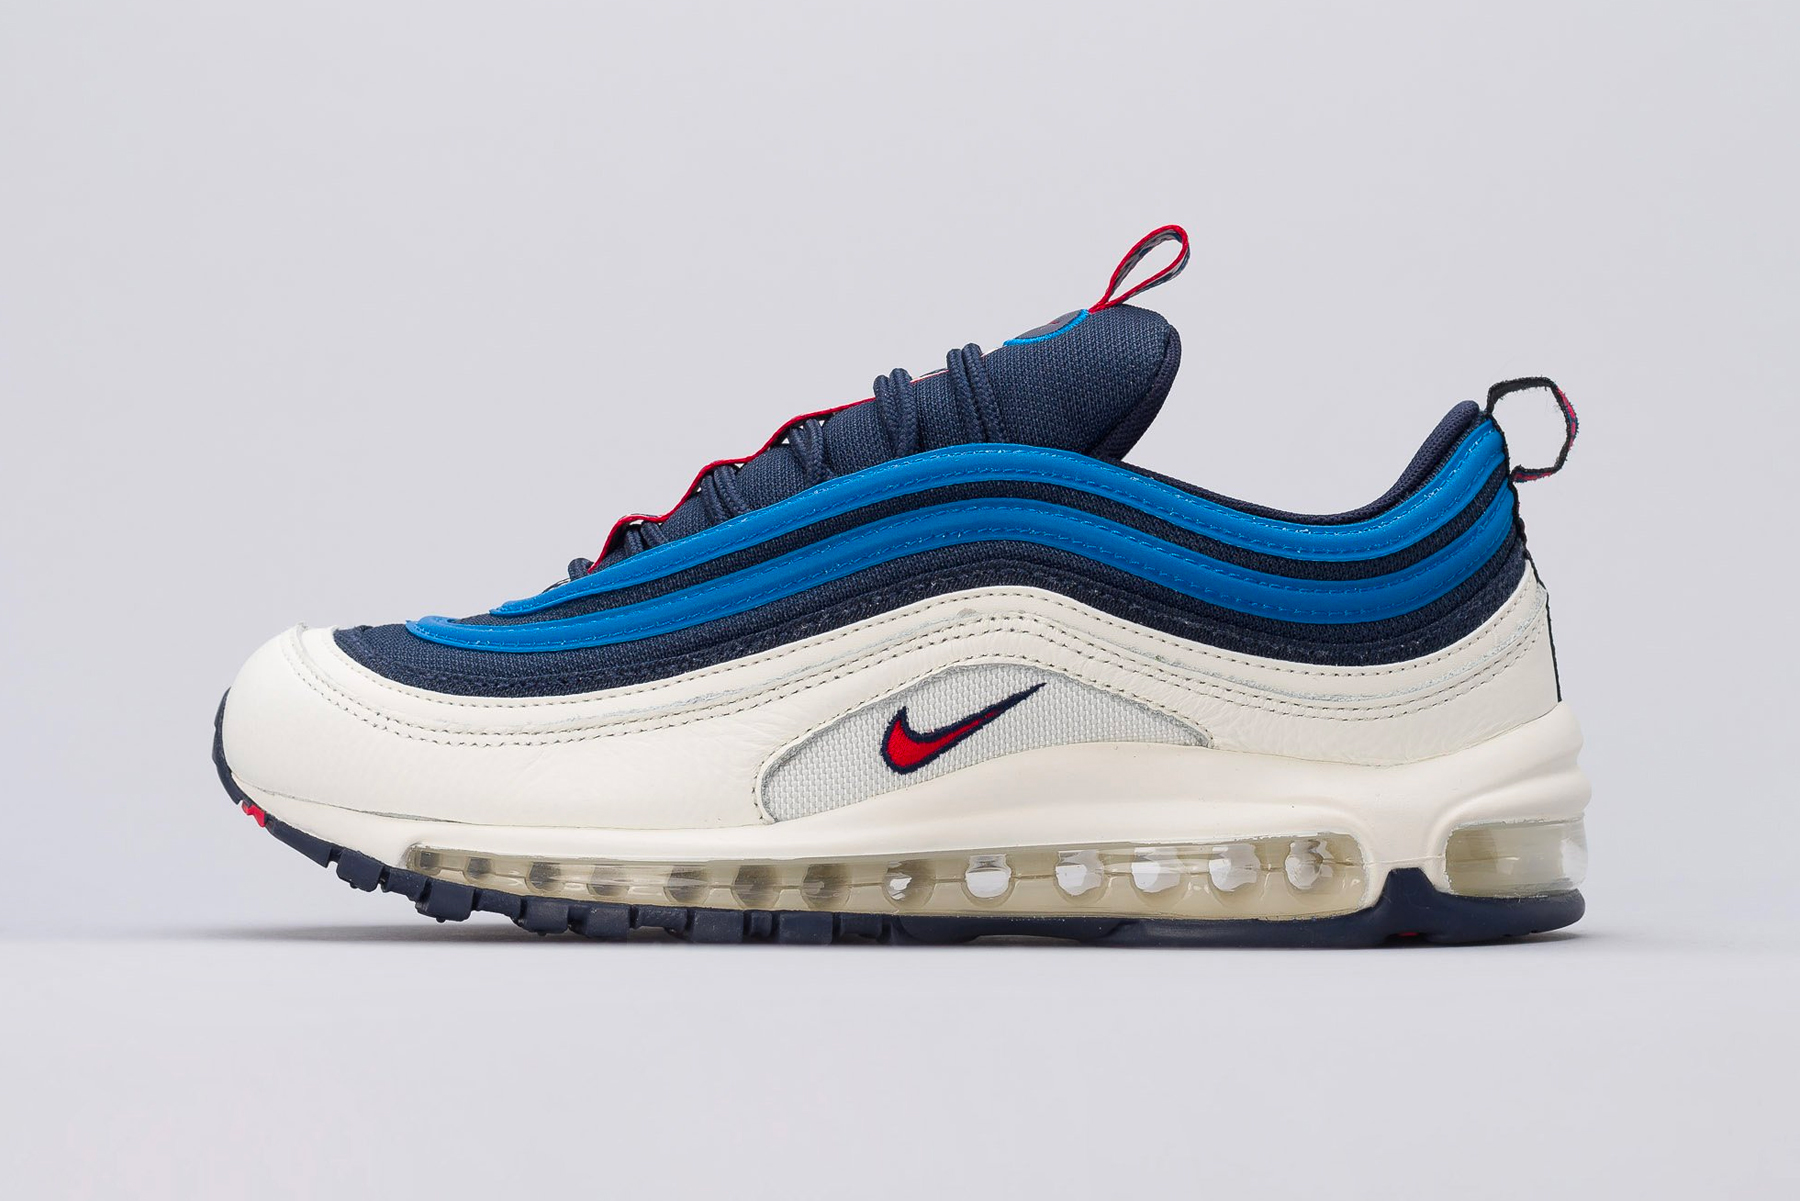 Nike Air Max 97 Pull Tab blue white red release info sneakers footwear